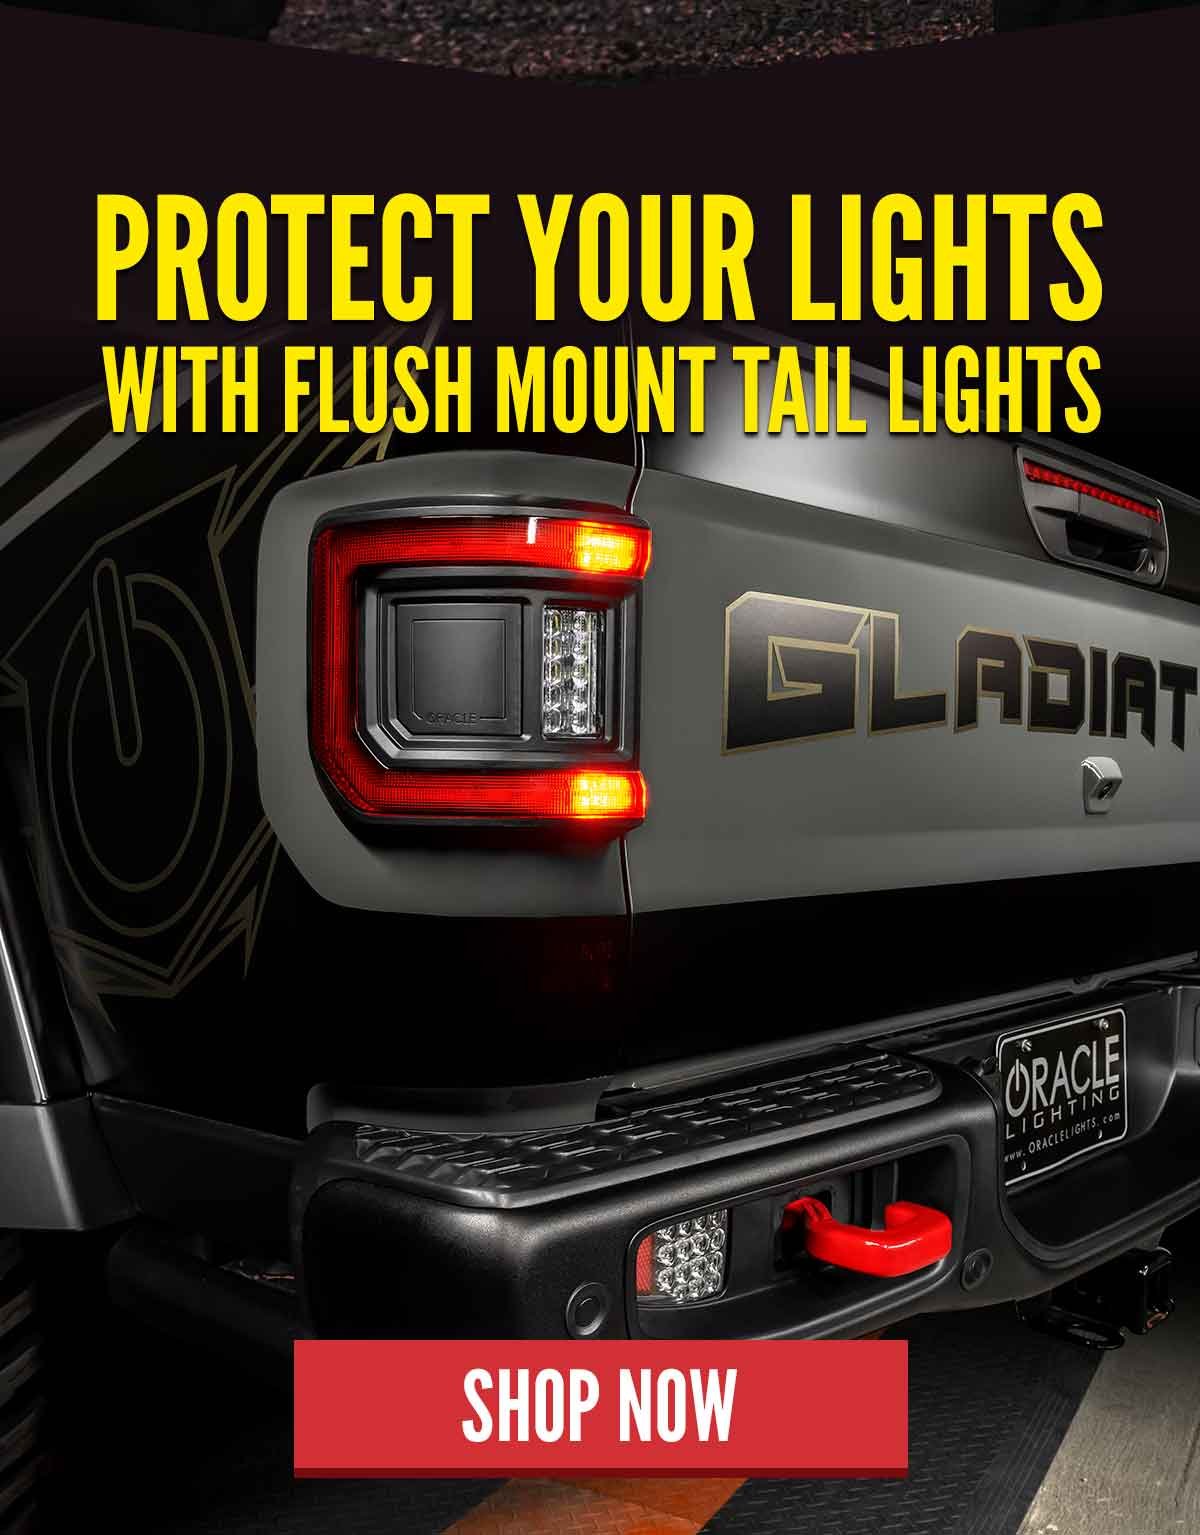 Protect Your Lights With Flush Mount Tail Lights